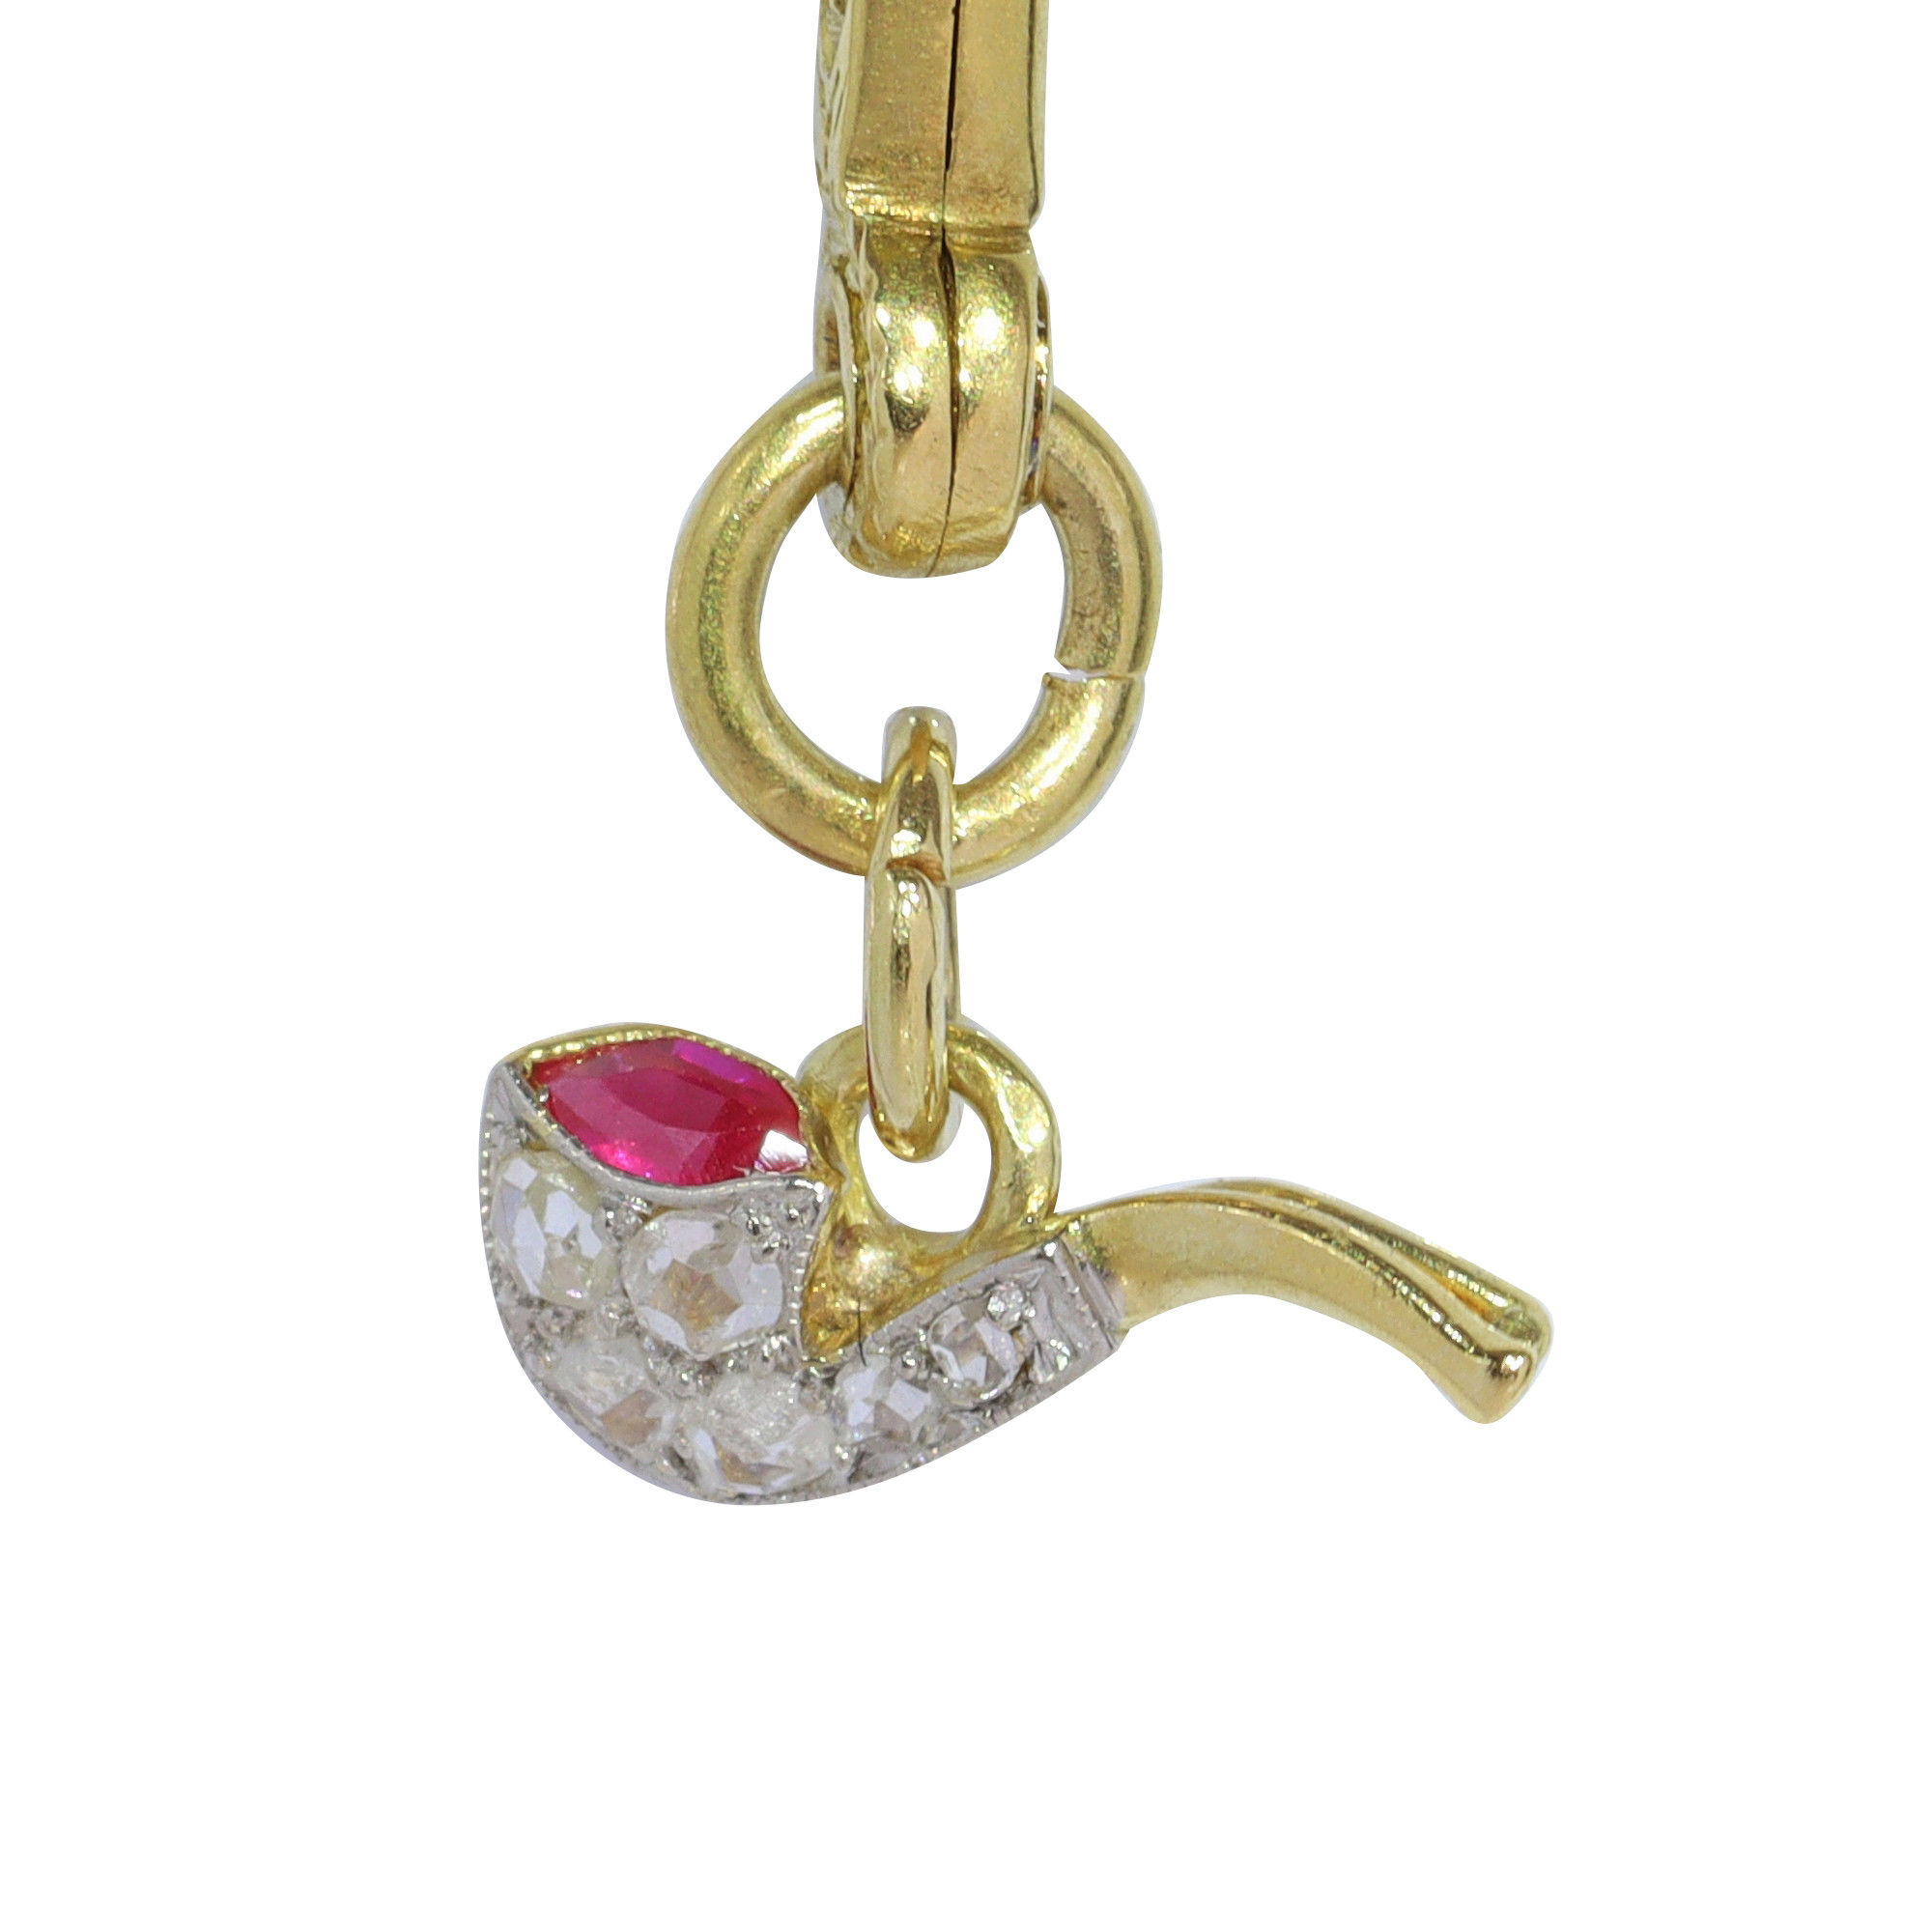 Deco Delight: Exquisite Craftsmanship in an 11 millimetre Miniature Smoking  Pipe Charm - Gallerease